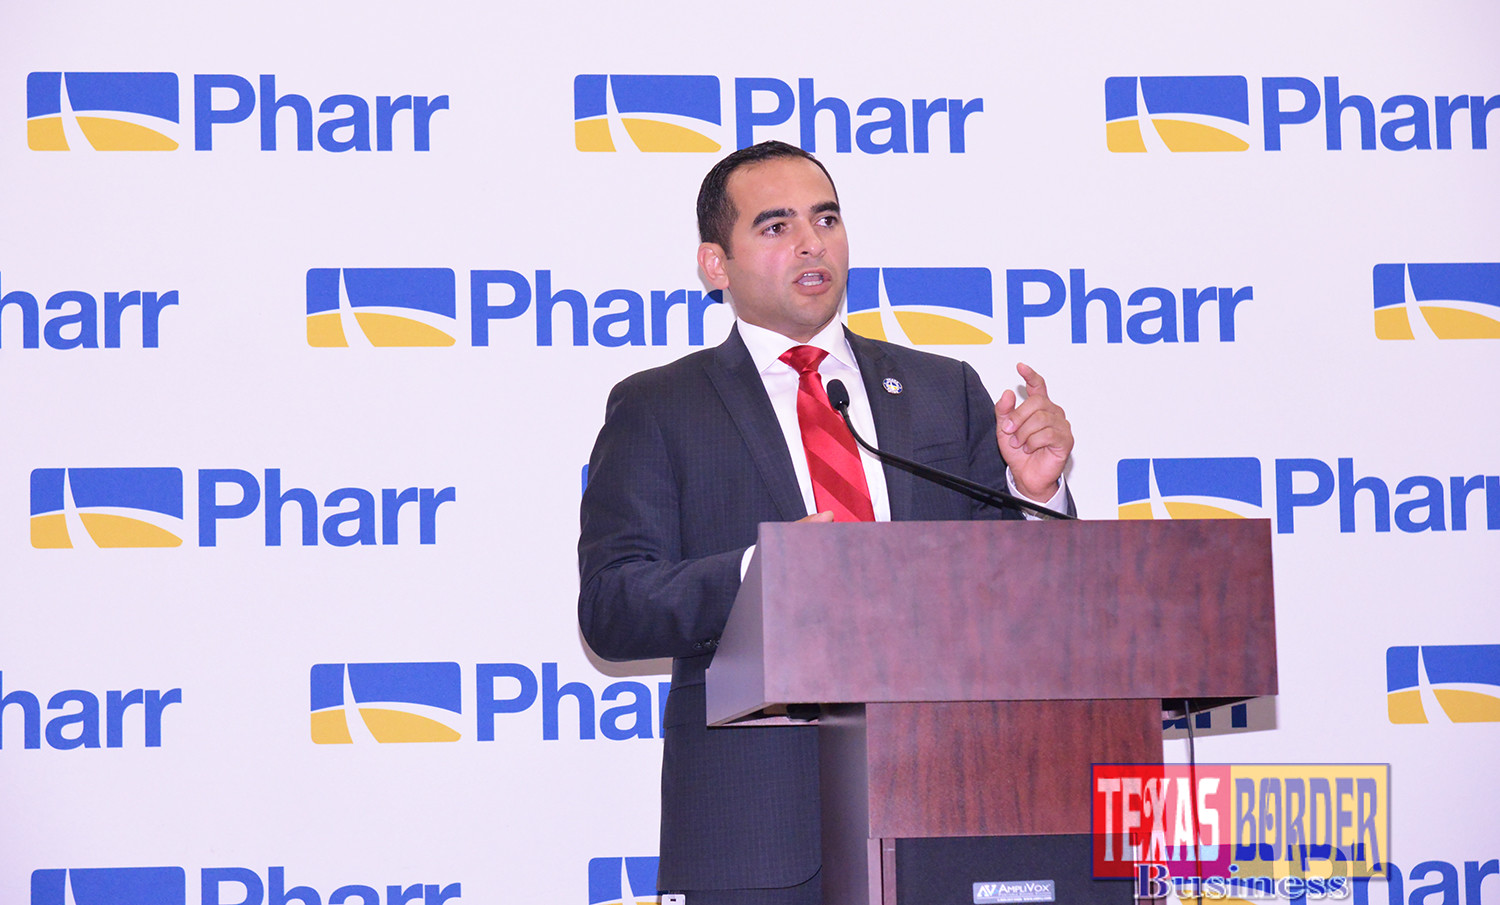 Juan Guerra, current Pharr City Manager said, "It is the current administration's position to make the best of the situation, and move forward, to professionalize the staff, use market research and other data to make informed decisions in the best interest of the City and not repeat mistakes that result in such major losses."